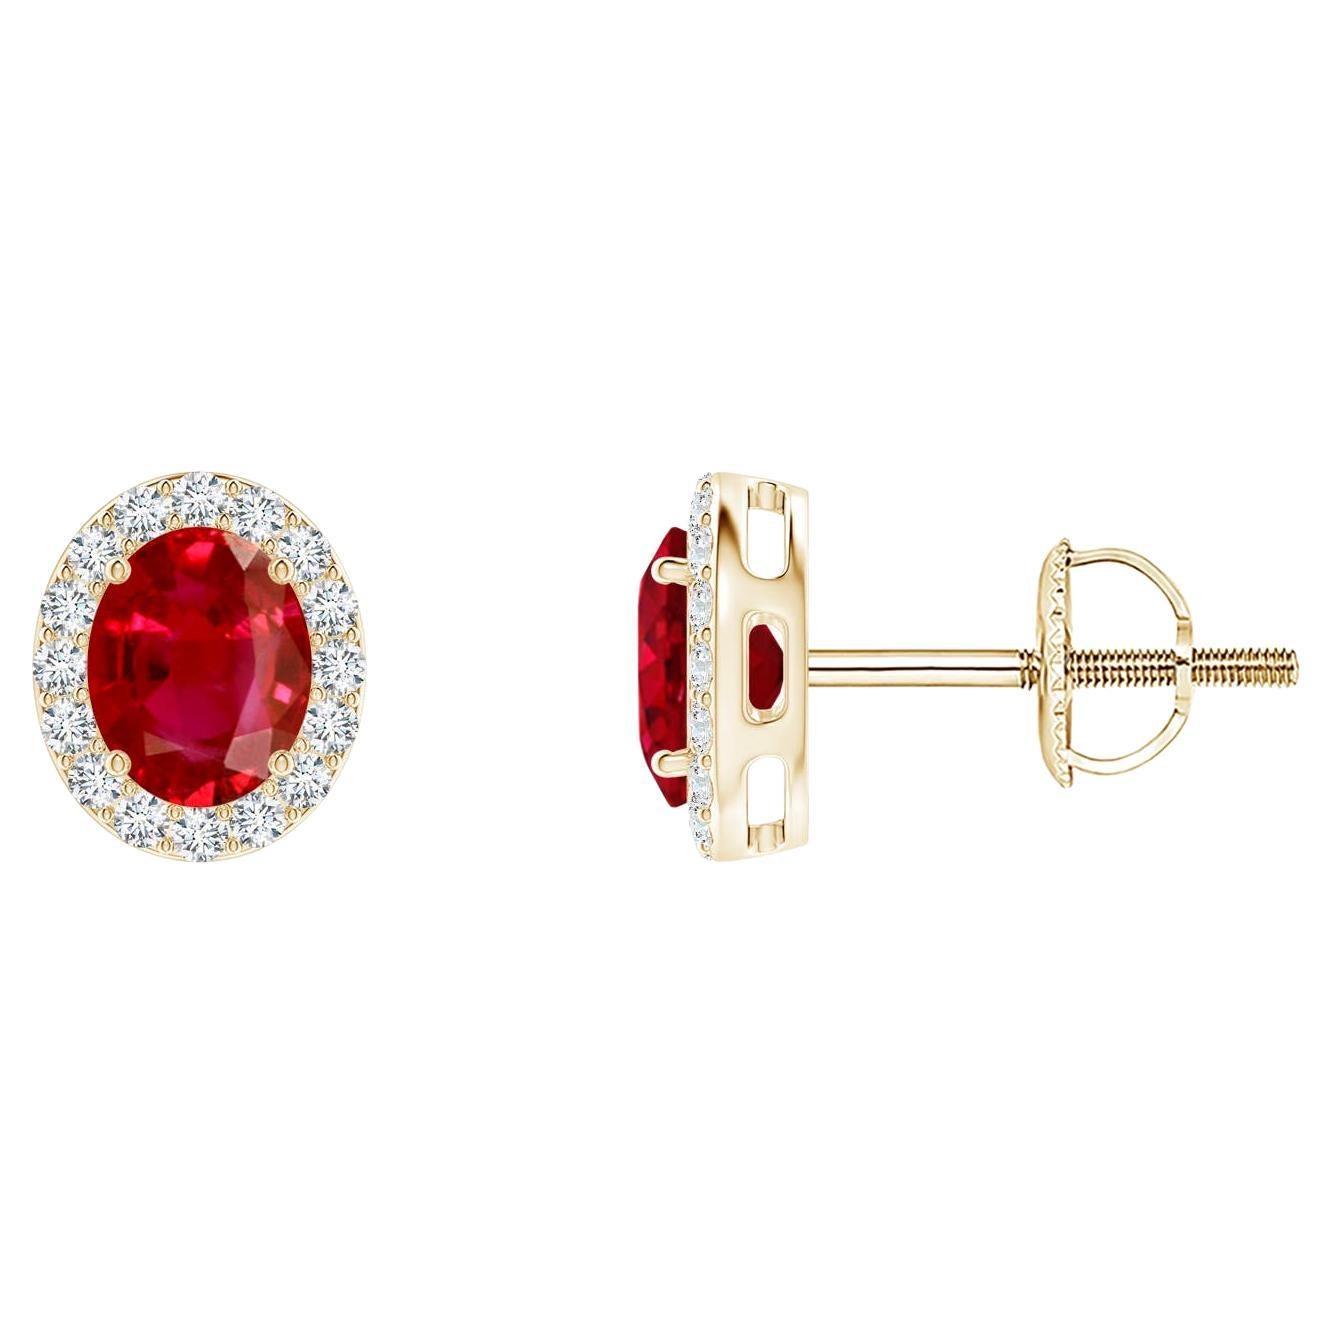 ANGARA Natural Oval 0.80ct Ruby Studs with Diamond Halo in 14K Yellow Gold